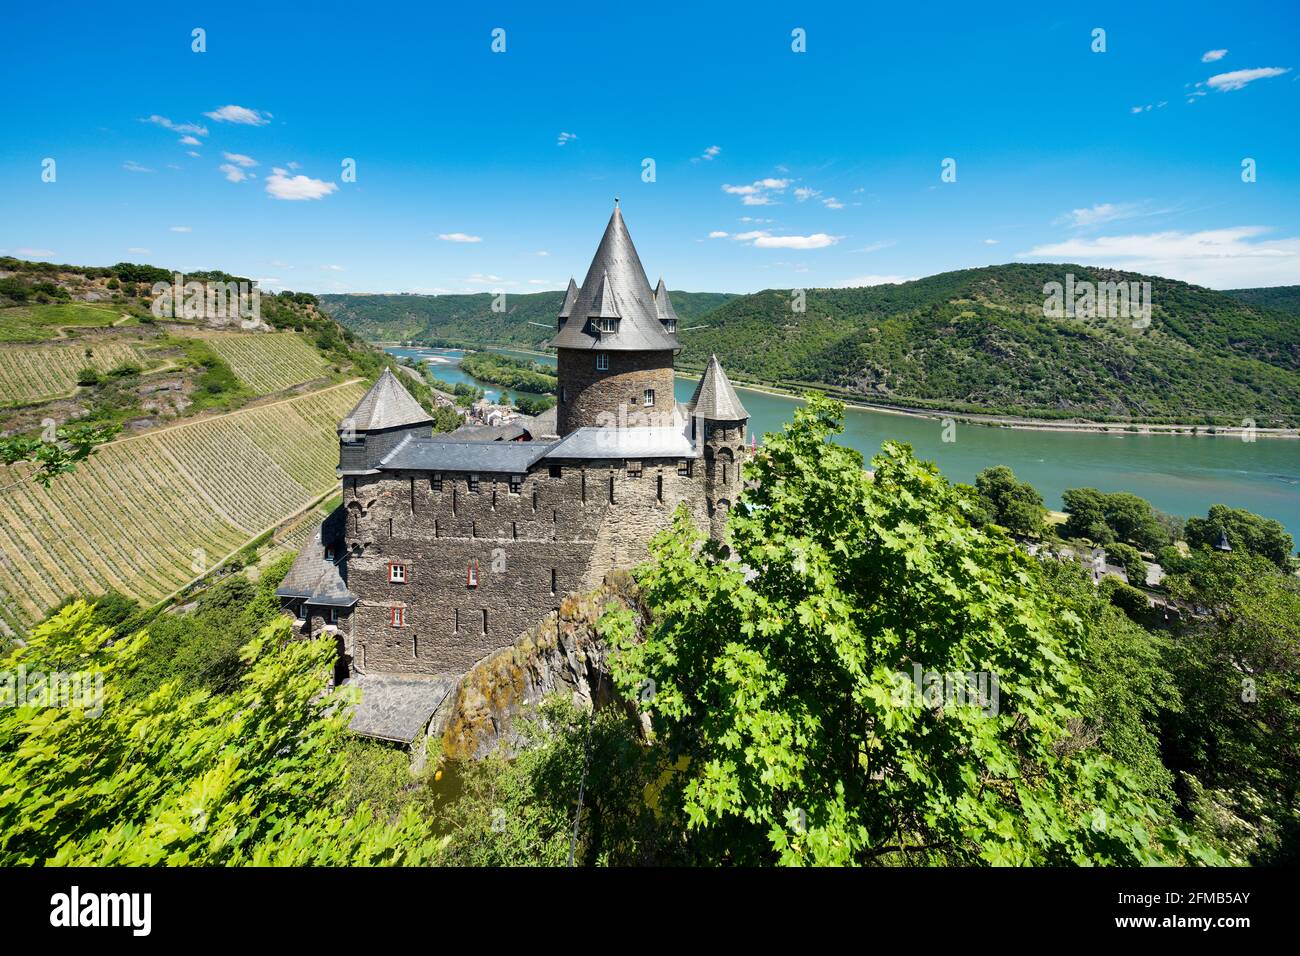 Germany, Rhineland-Palatinate, Bacharach, World Heritage Upper Middle Rhine Valley, view of the Rhine with Stahleck Castle Stock Photo